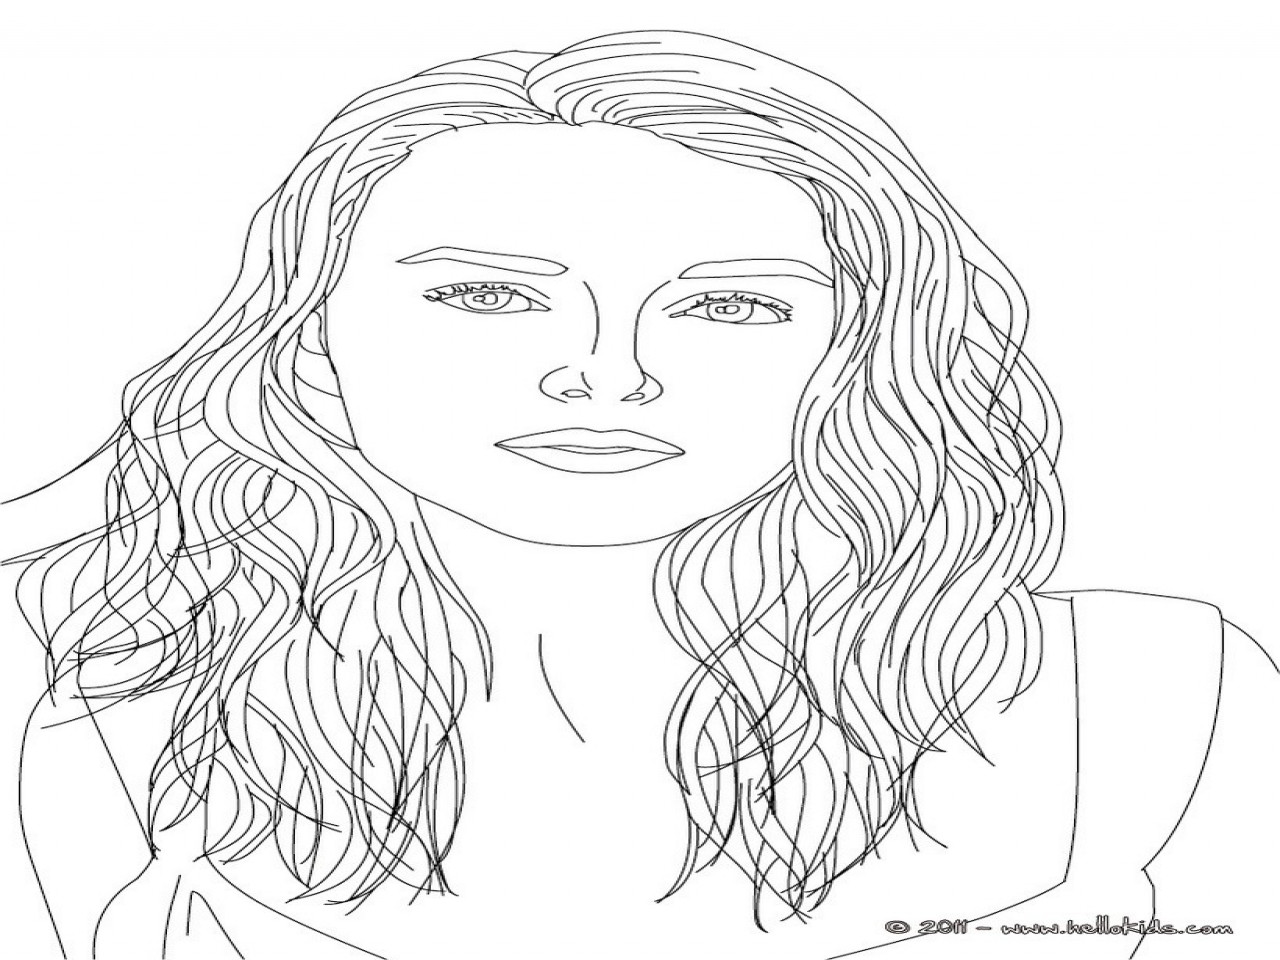 People Coloring Pages For Adults
 Coloring Pages Realistic People grig3